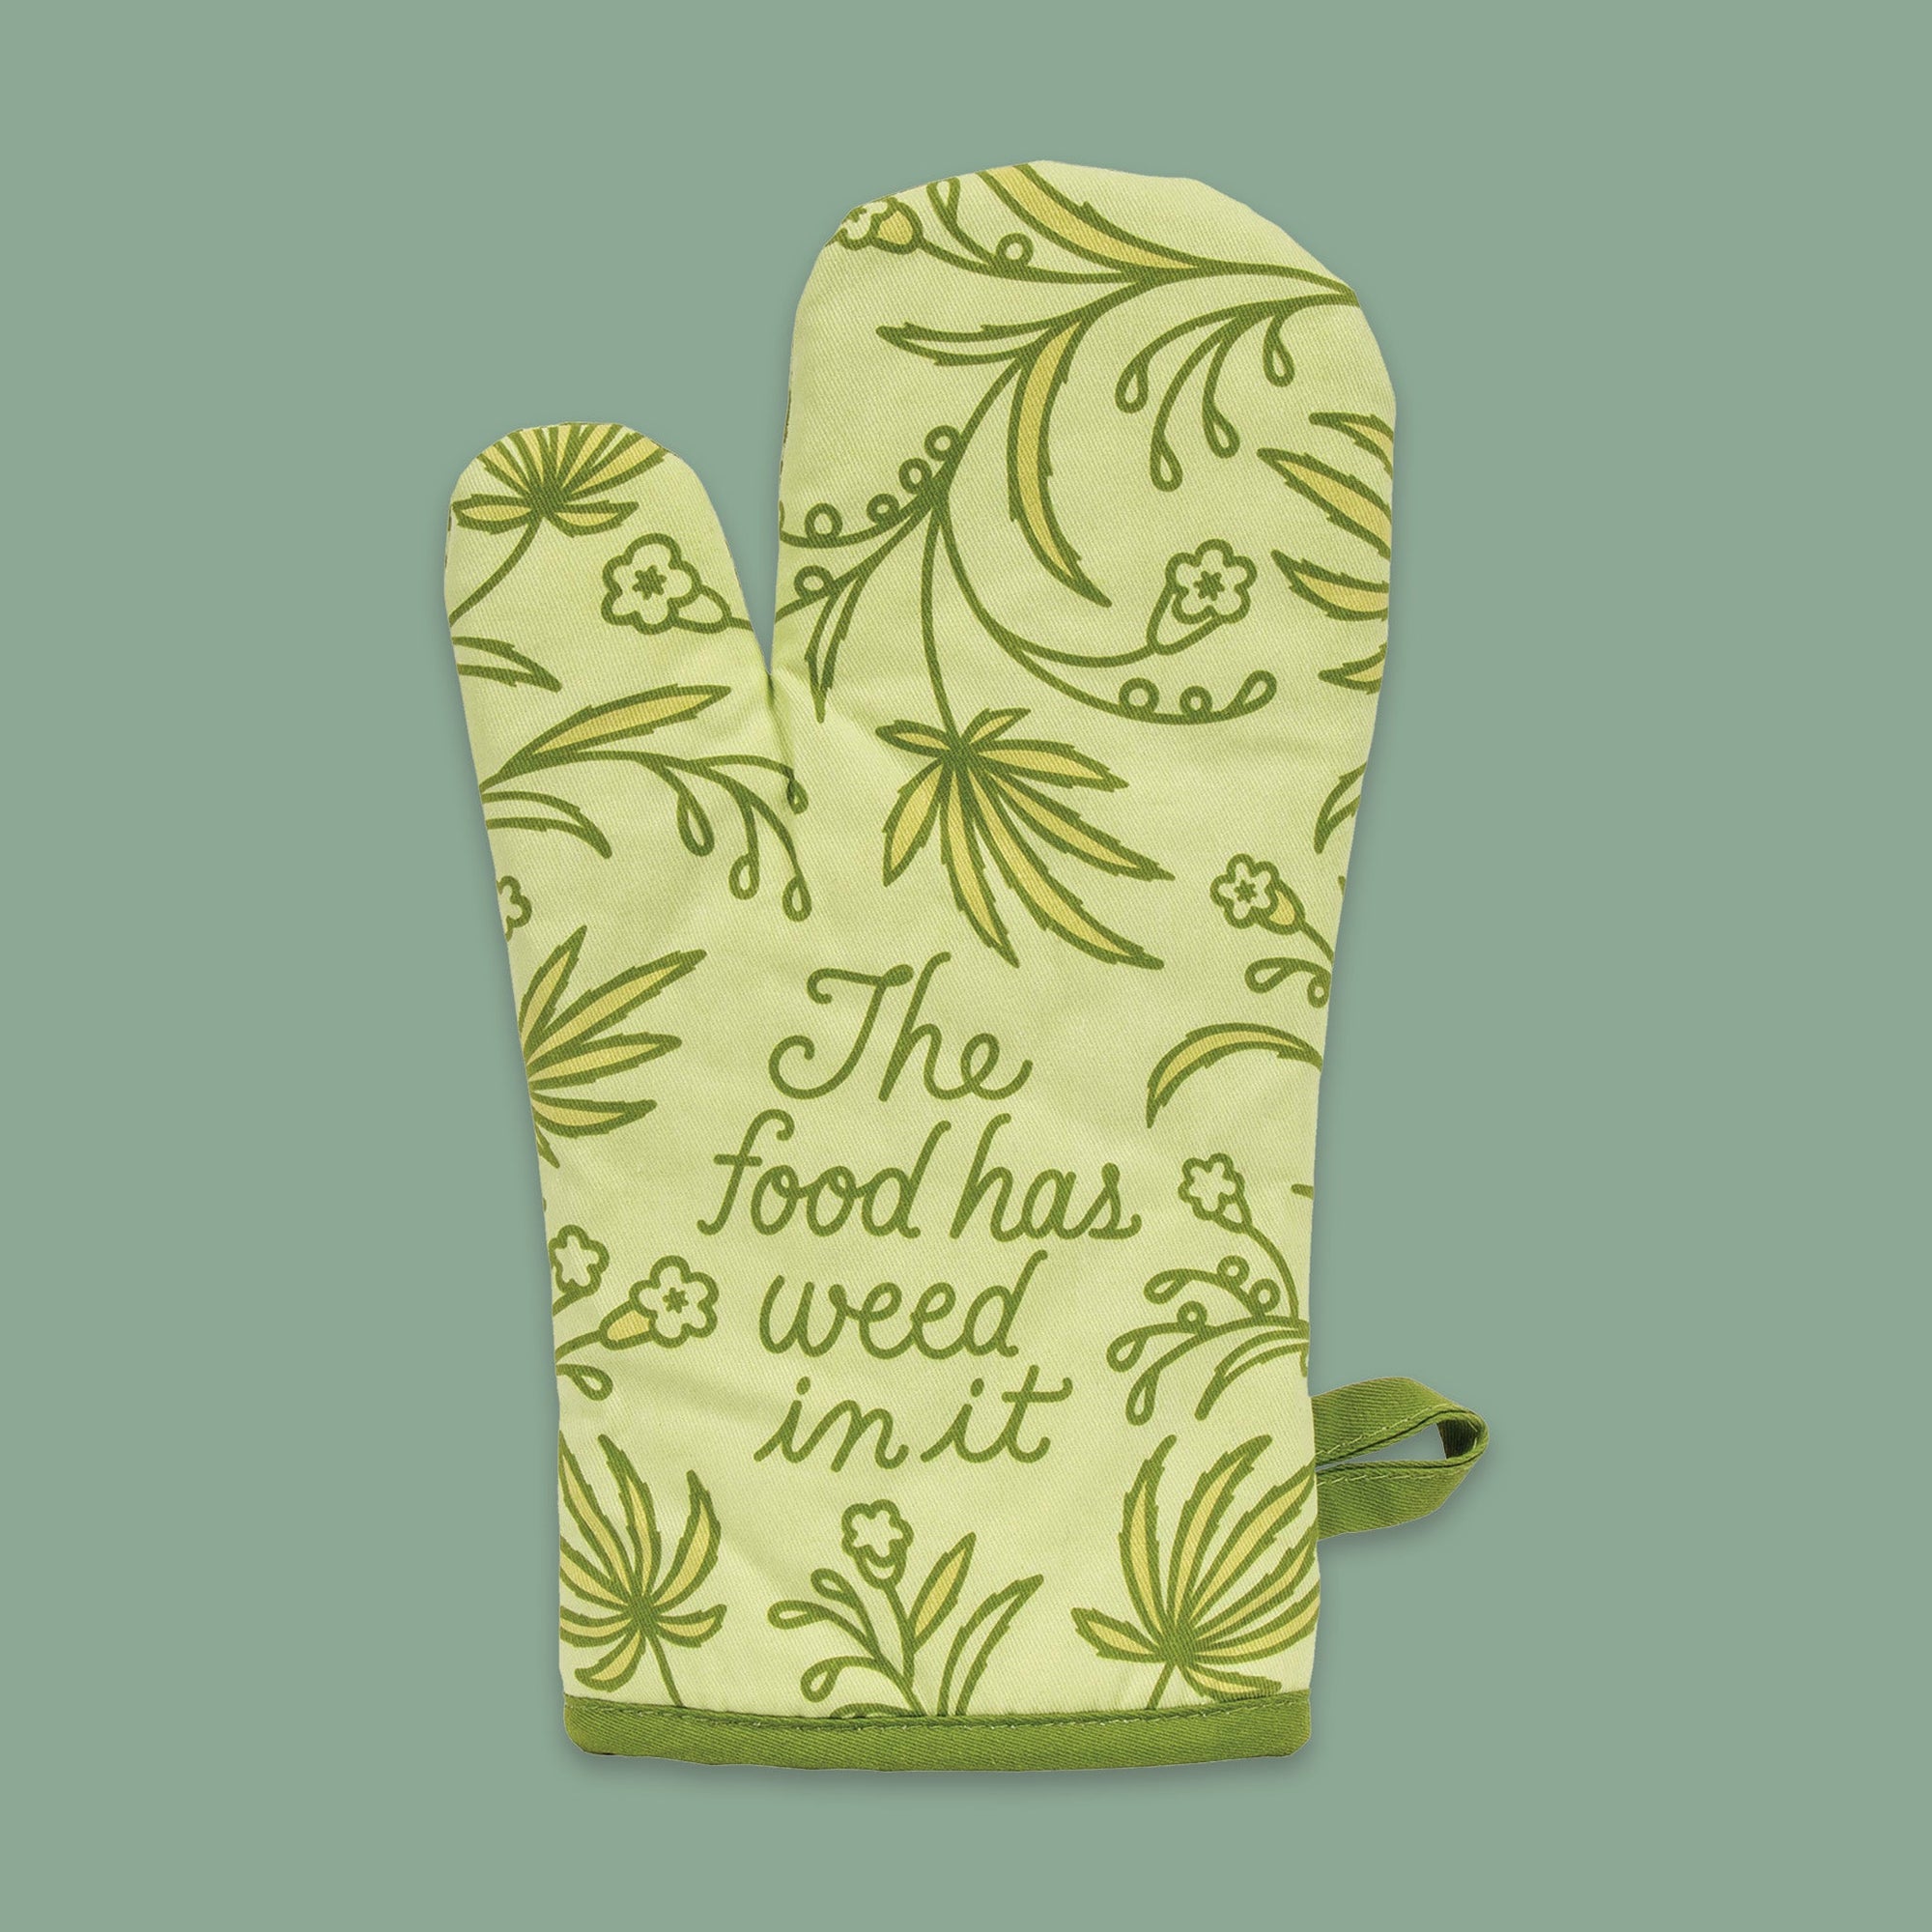 On a moss green background sits an oven mitt. The front of this celery green oven mitt has illustrations of green marijuana leaves and flowers on it and it says "The Food has weed in it" in green handwritten script lettering.